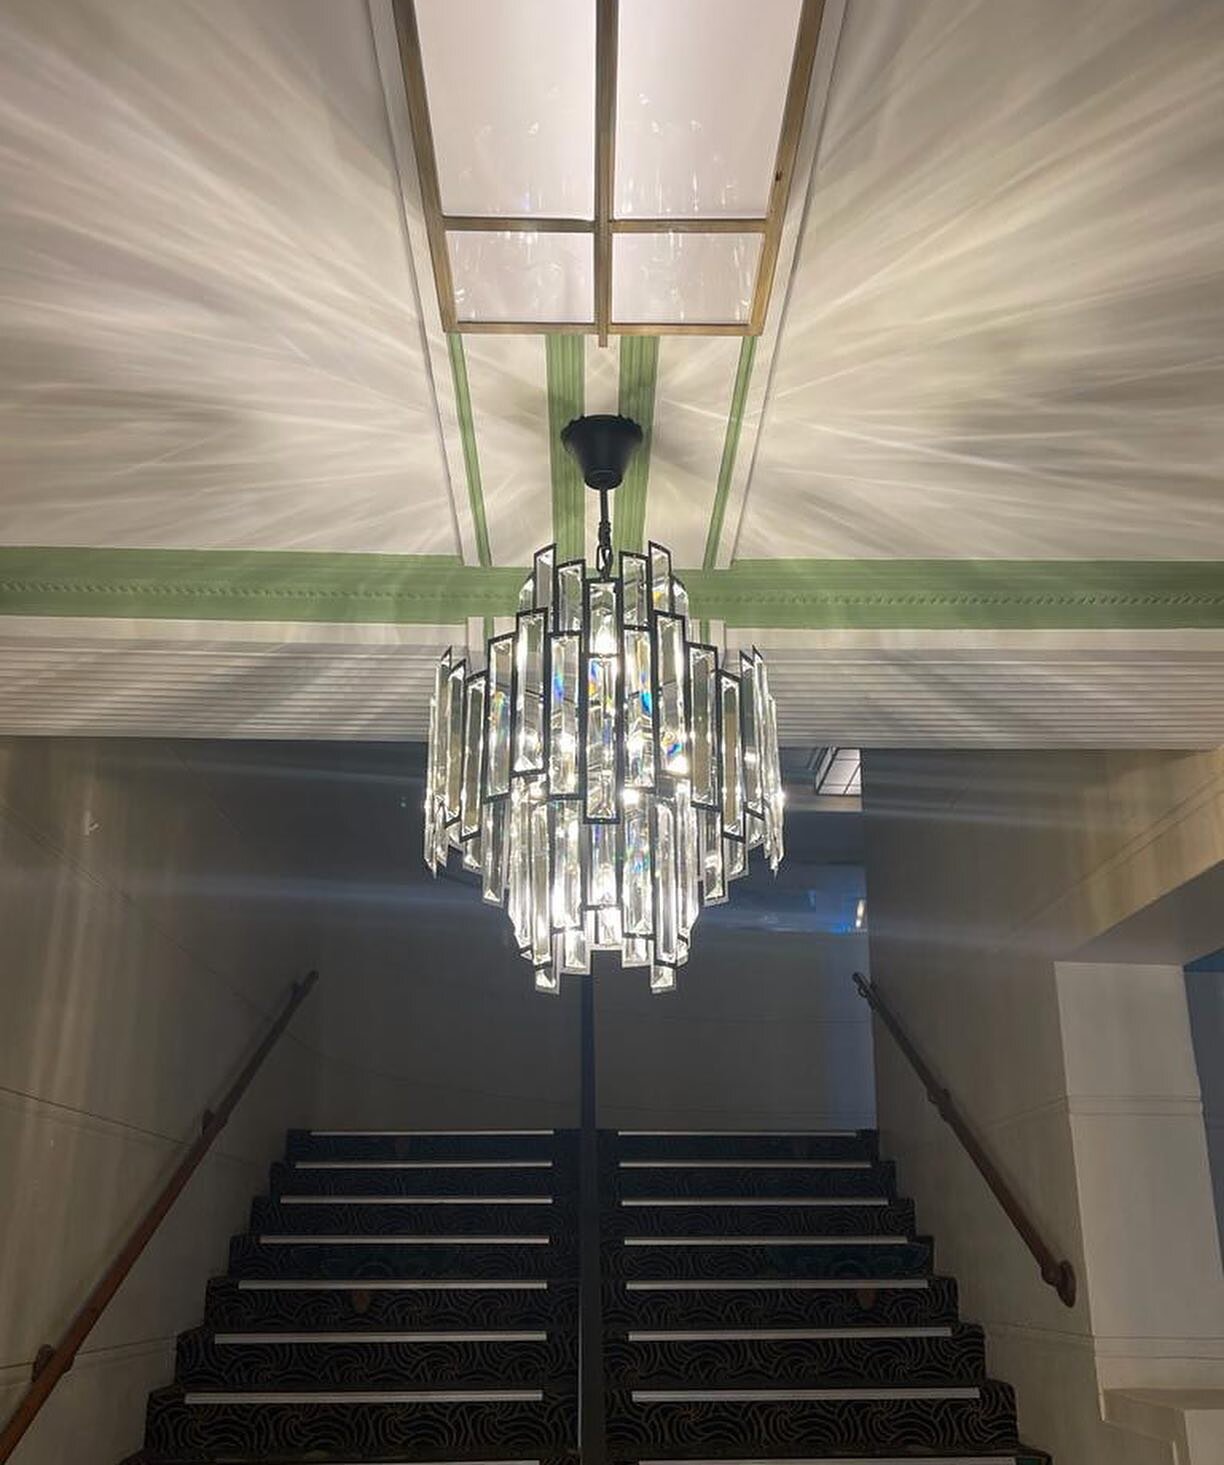 PROJECT UPDATE: RITZ CINEMA, RANDWICK-
Renovations are coming along nicely at the Ritz Cinema in Randwick!
The cinema opened in 1937, and although major renovations are being completed throughout, they are retaining the art deco &amp; historic charm 